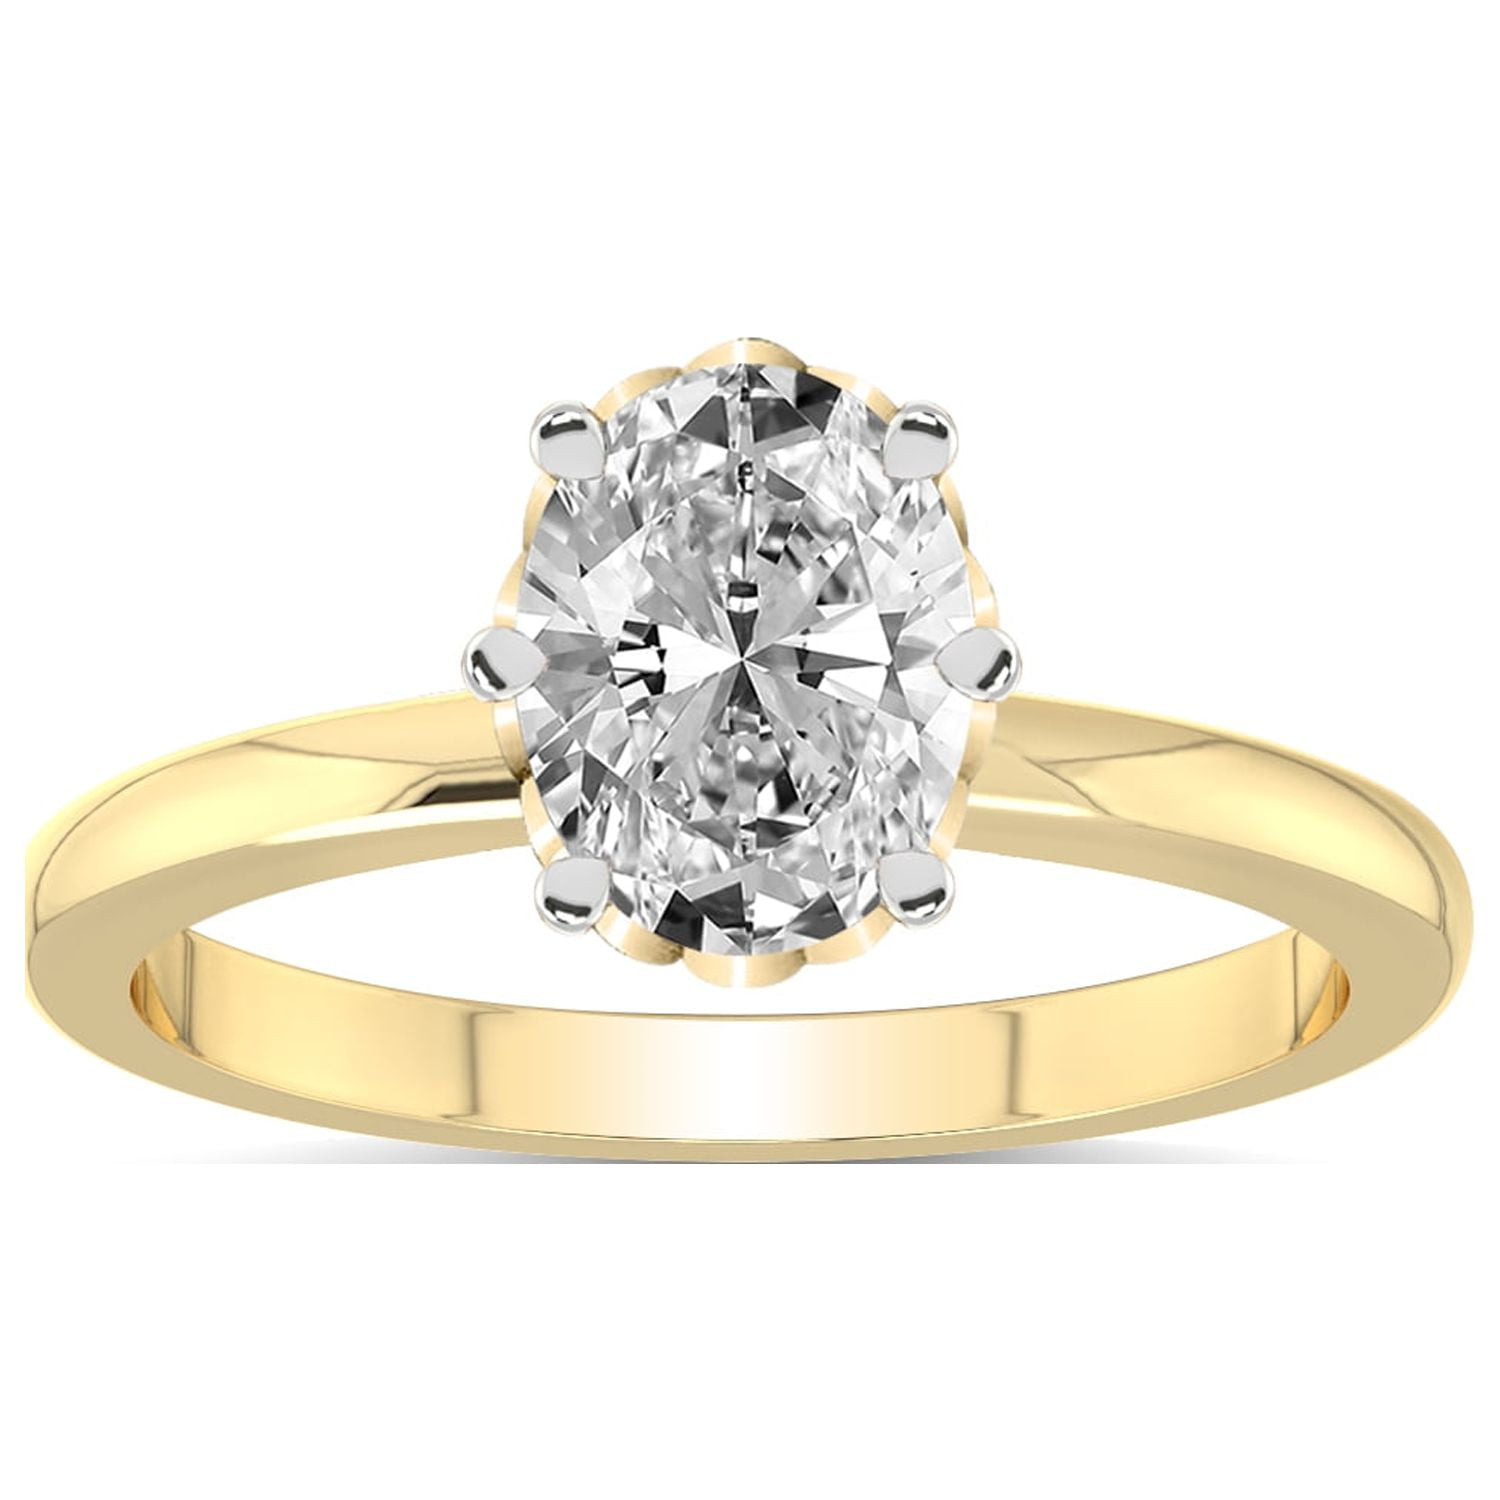 14K Gold Oval Shaped Solitaire Diamond Ring